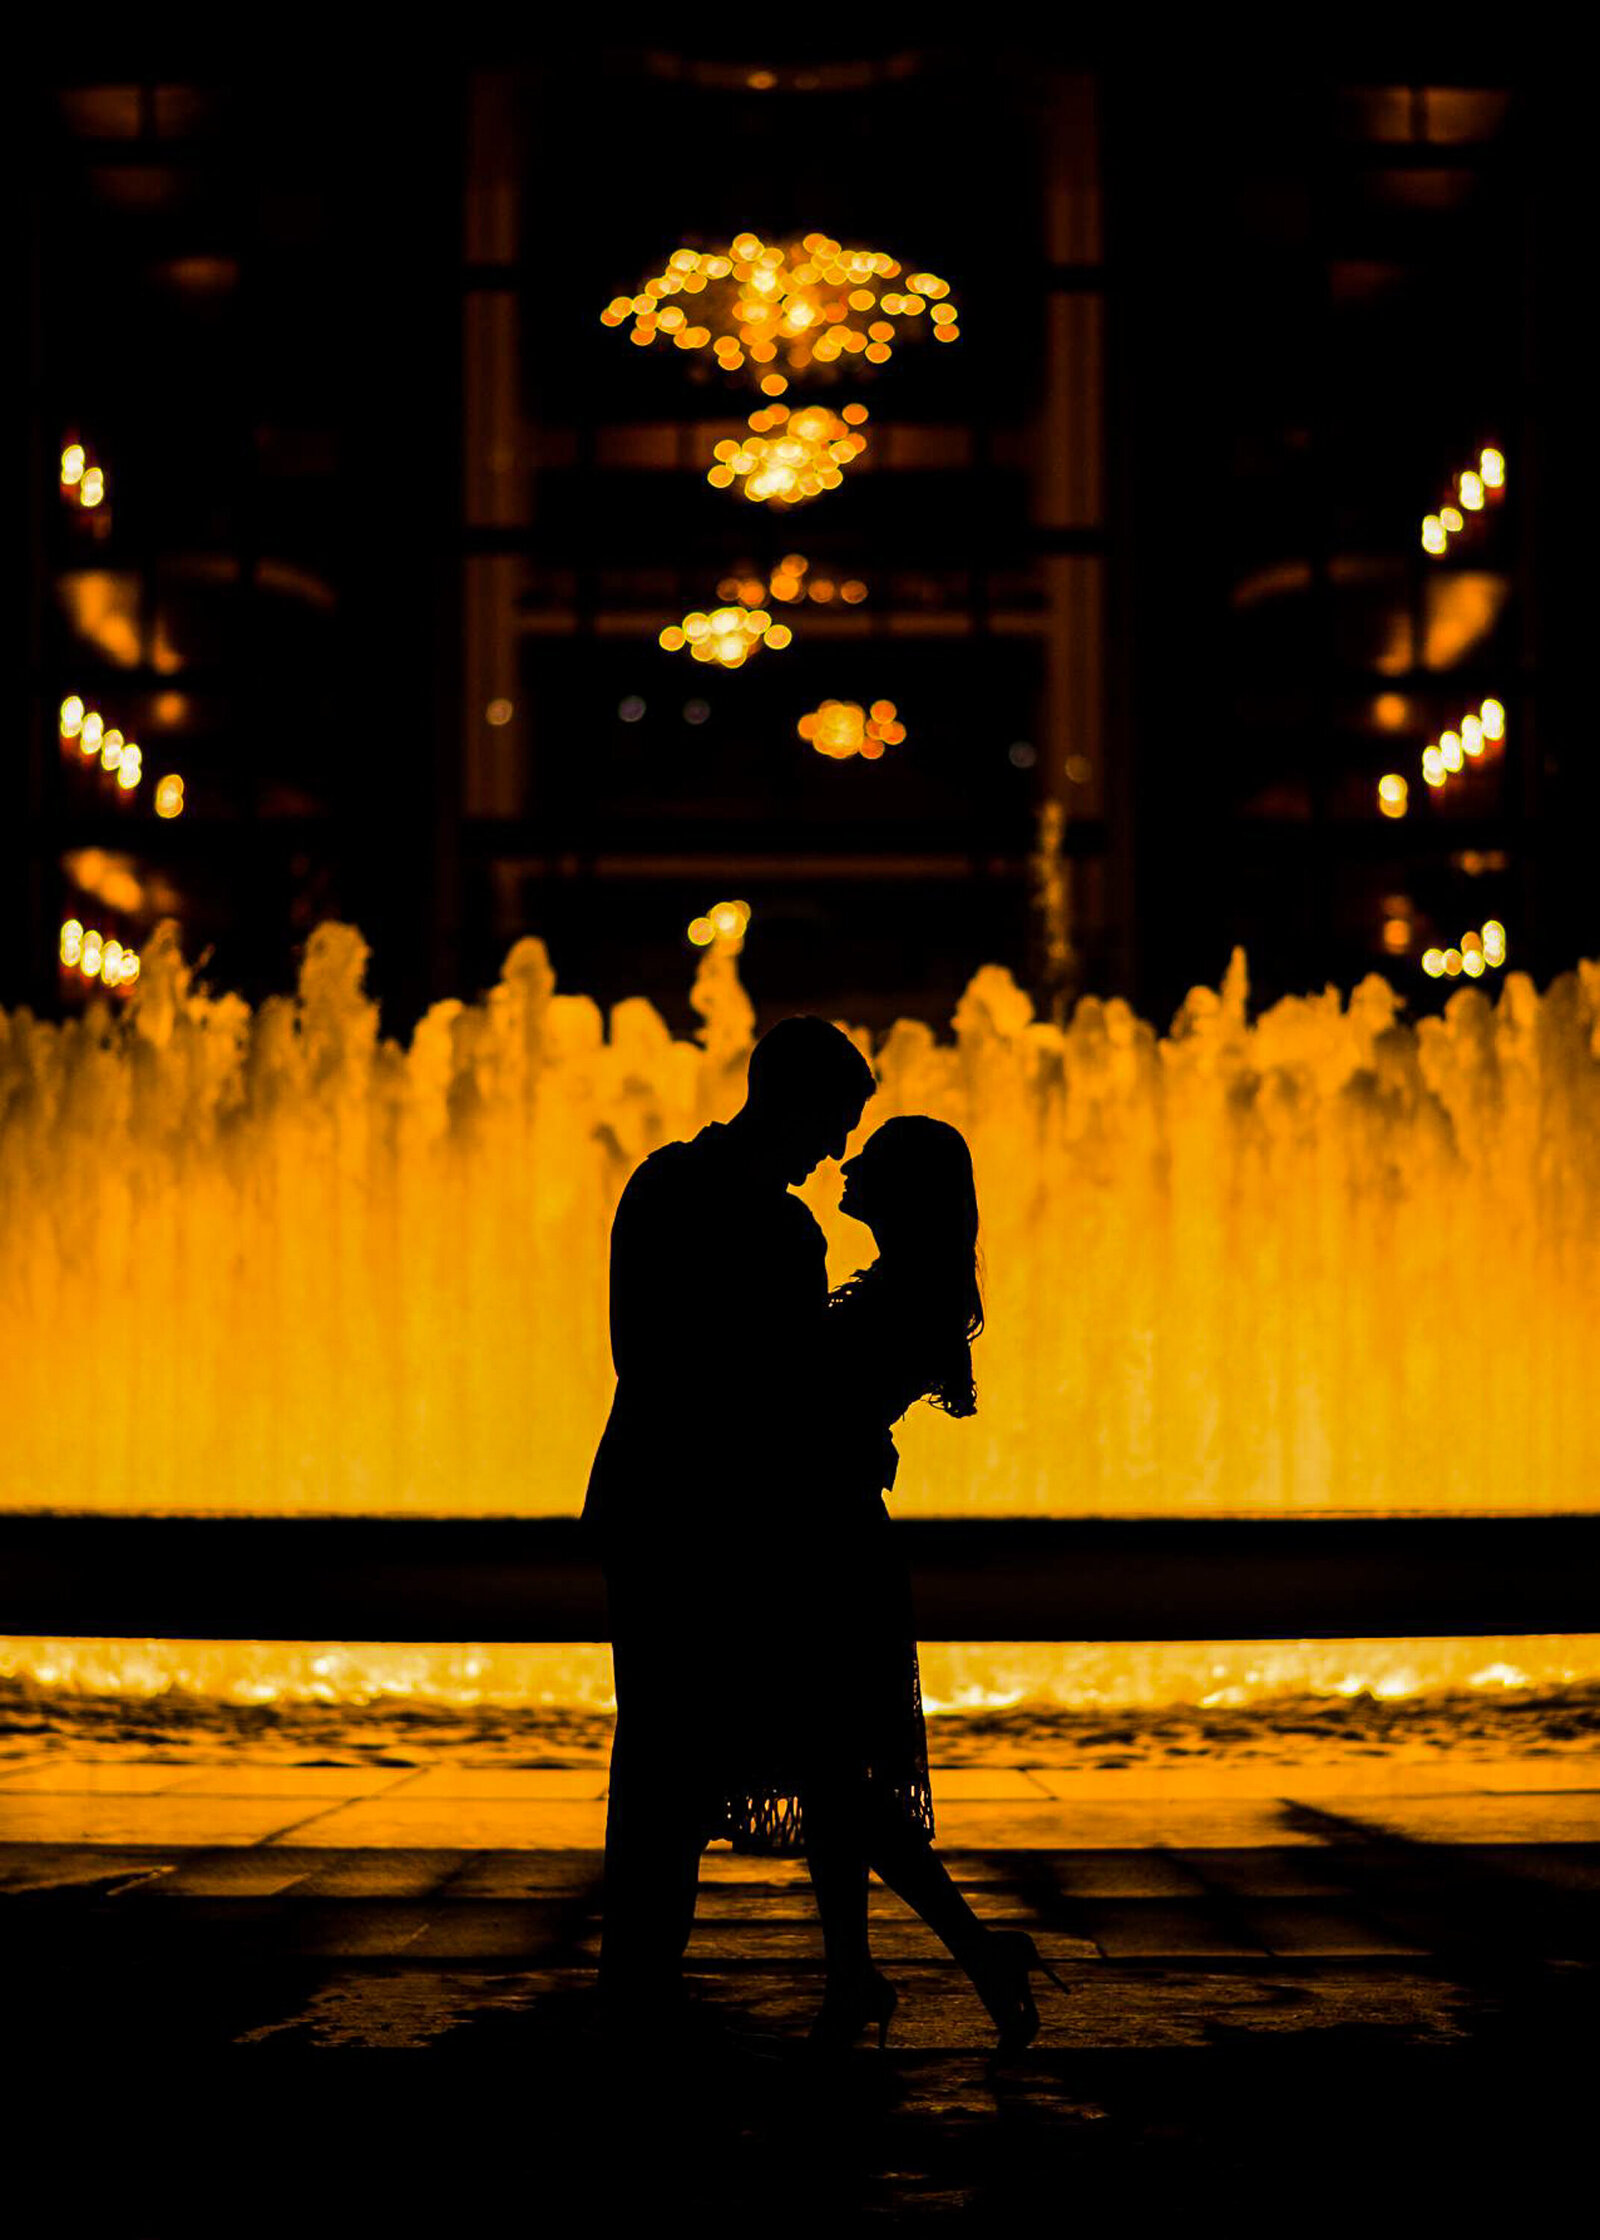 Find inspiration for your NYC engagement photoshoot; contact Ishan Fotografi today.